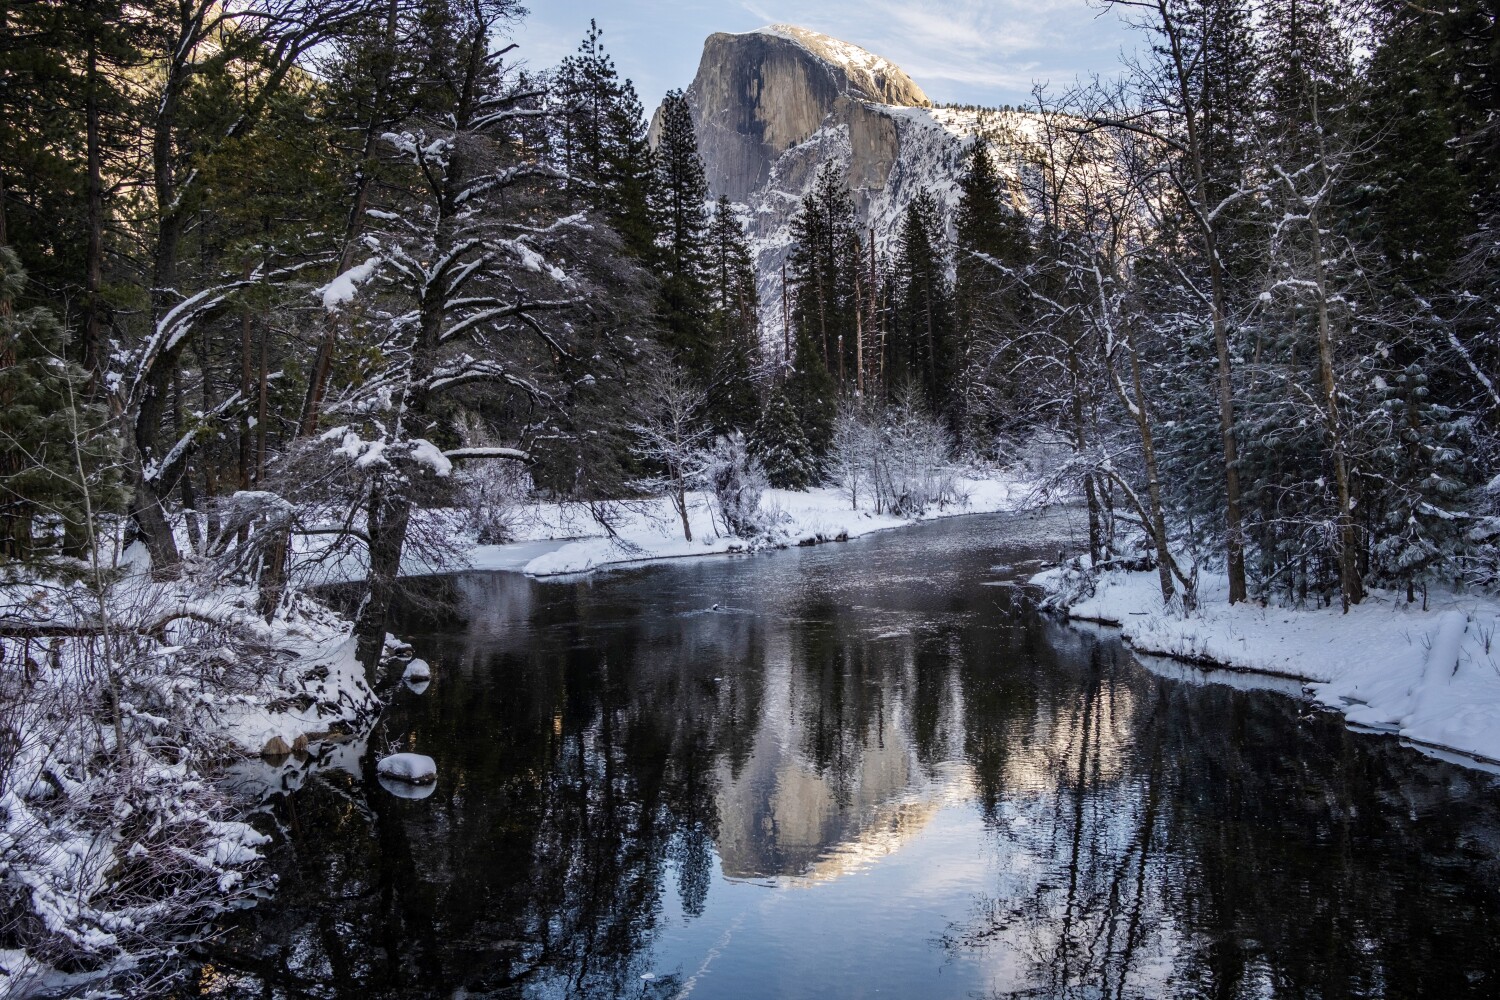 Postcard from Yosemite and beyond: Winter snowfall blankets the Sierra